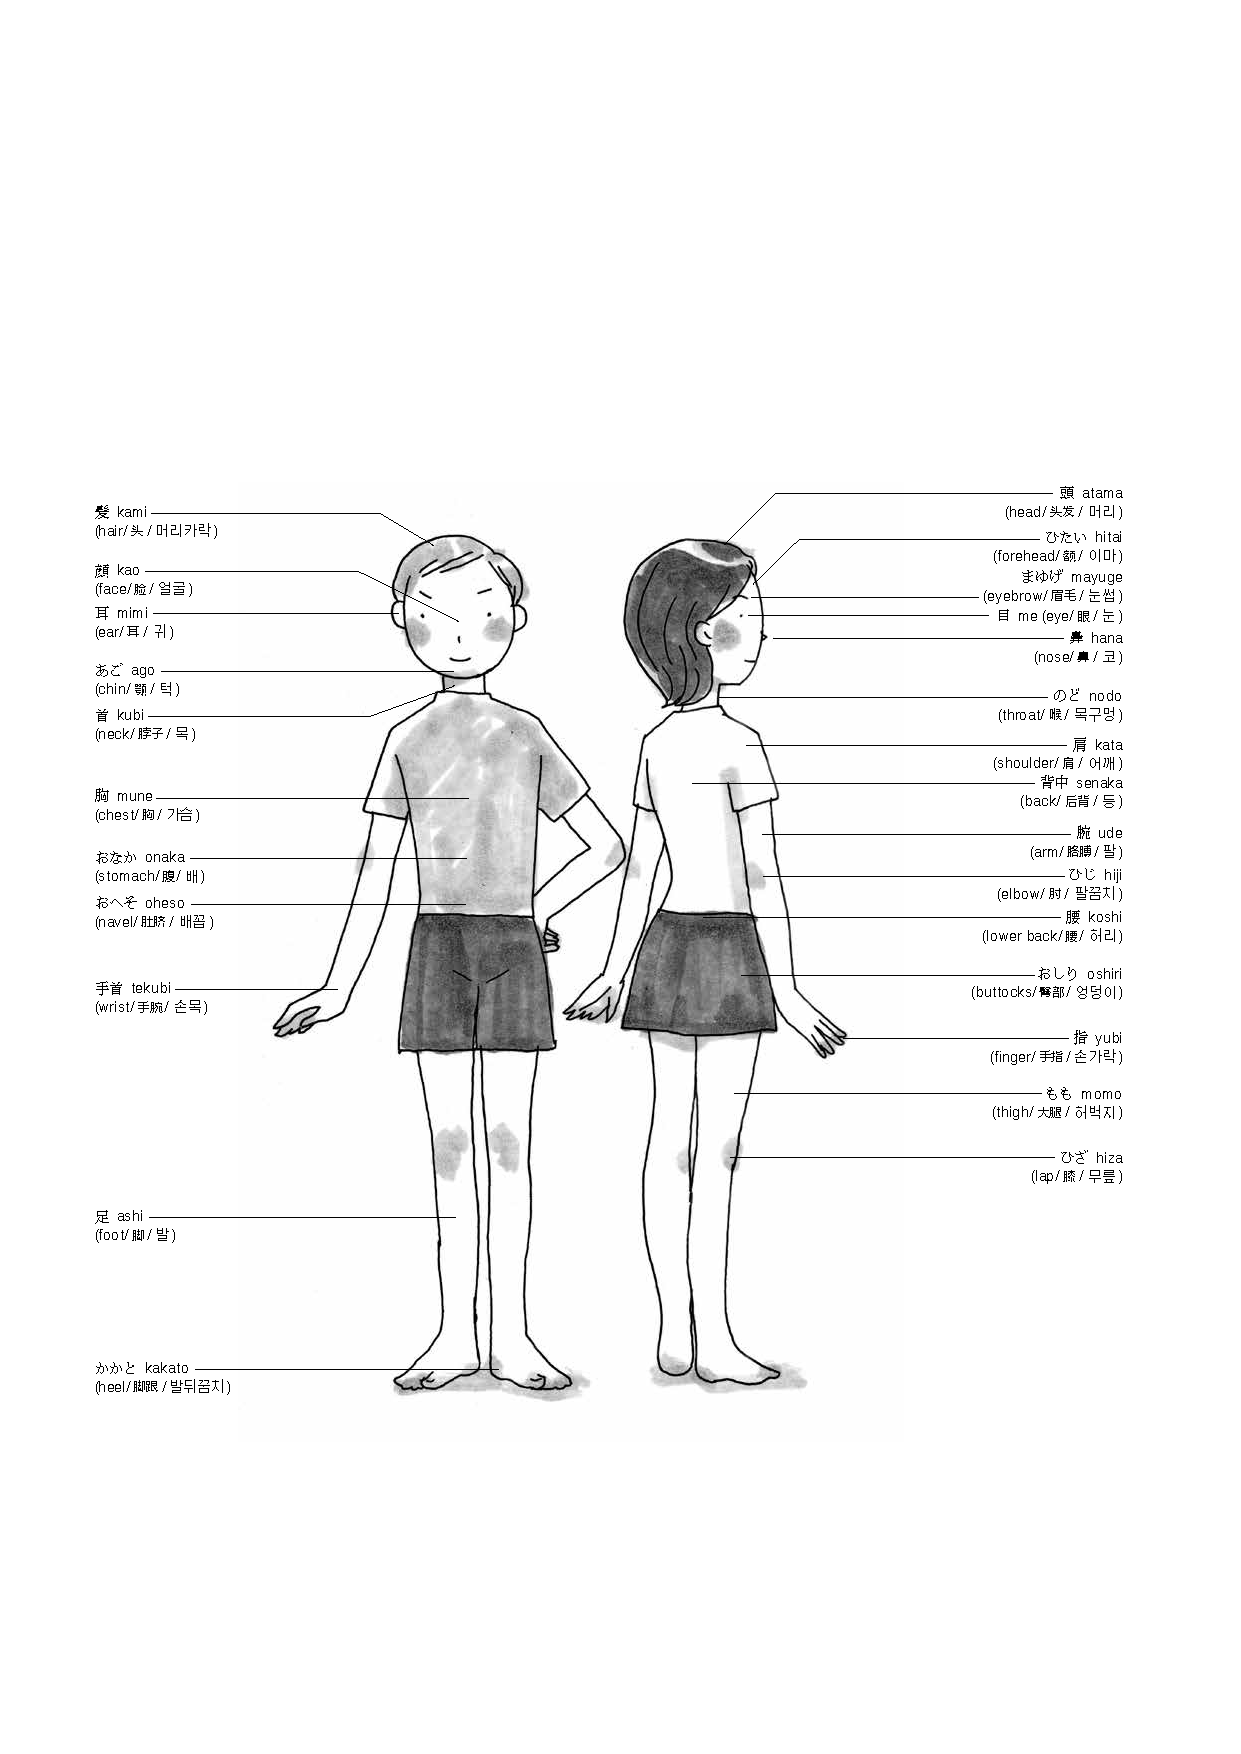 An illustration of Japanese/English representations of body parts